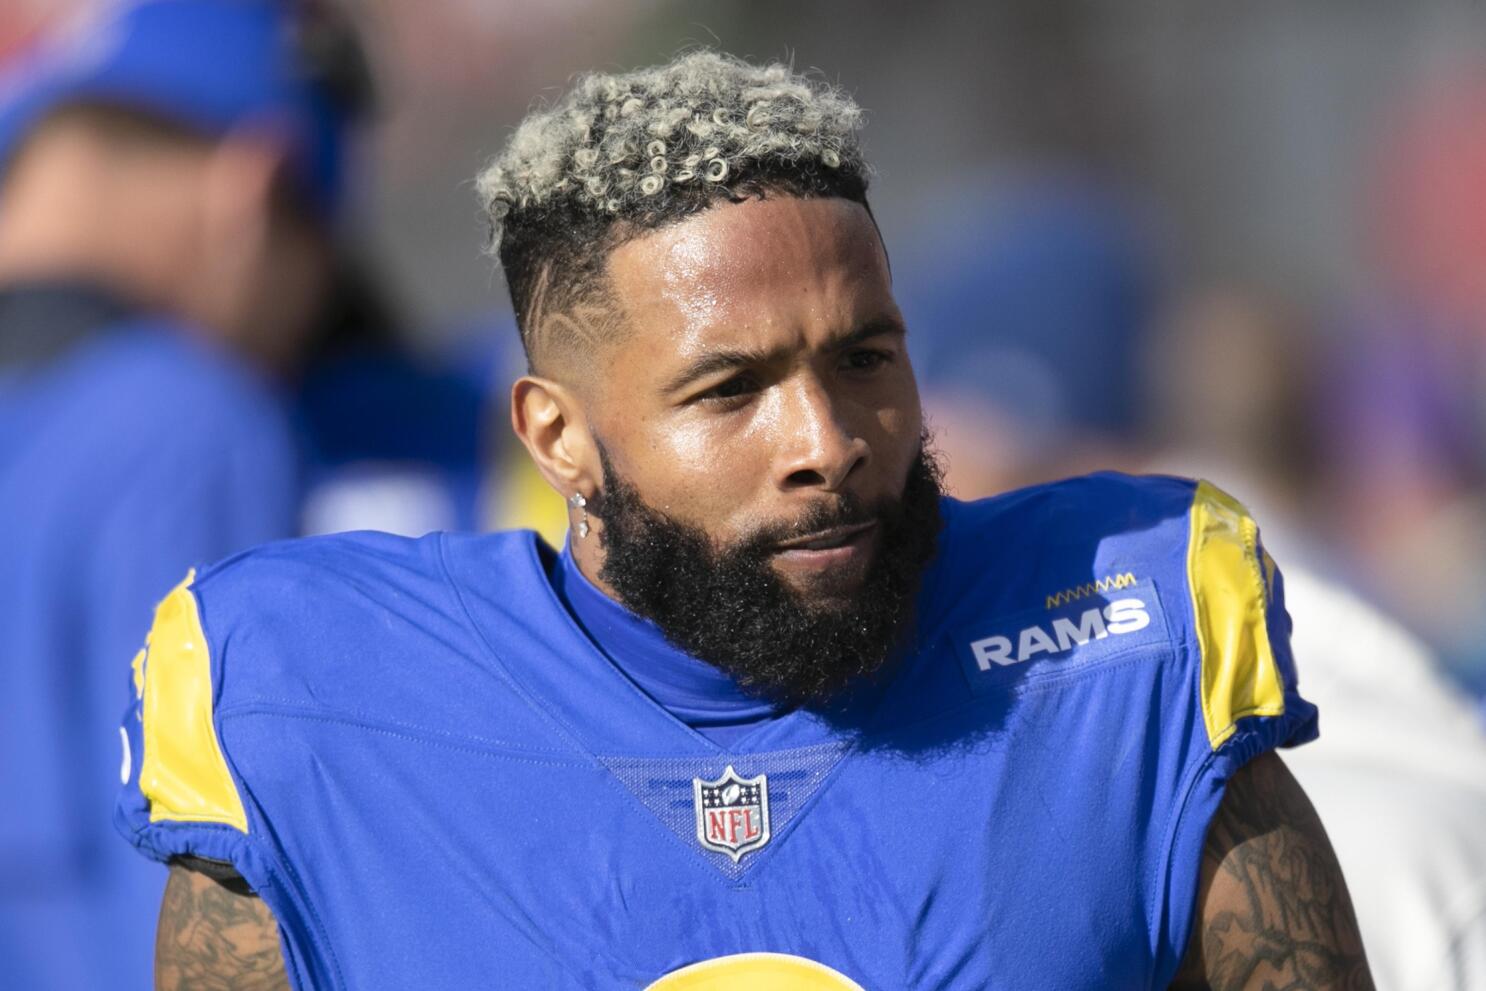 The Rams' signing of Odell Beckham Jr. means it is Super Bowl-or